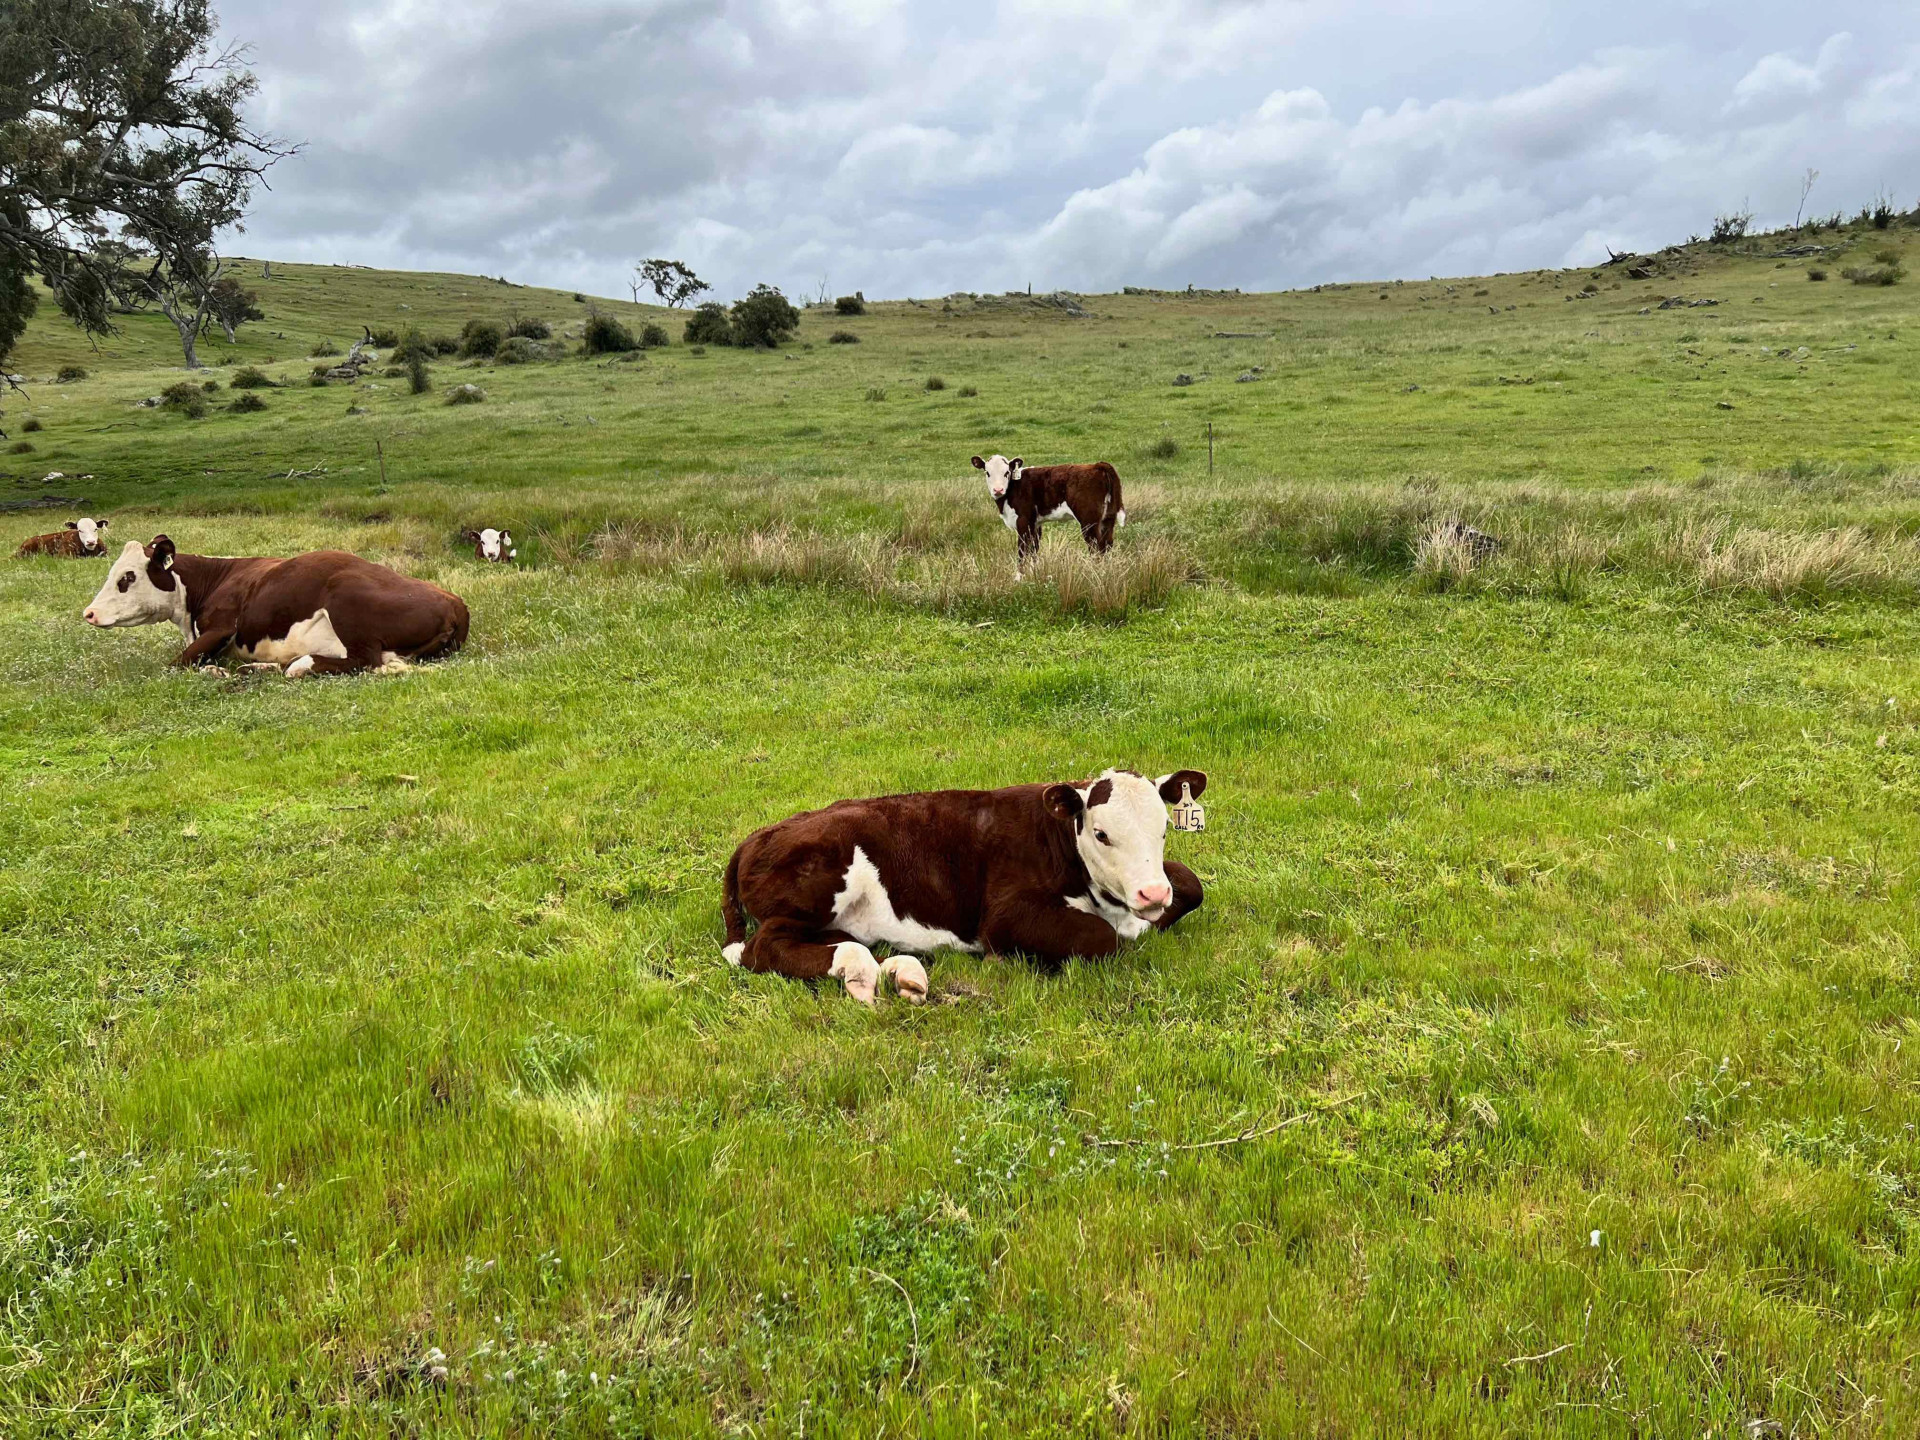 A number of cows relaxing in a large field.